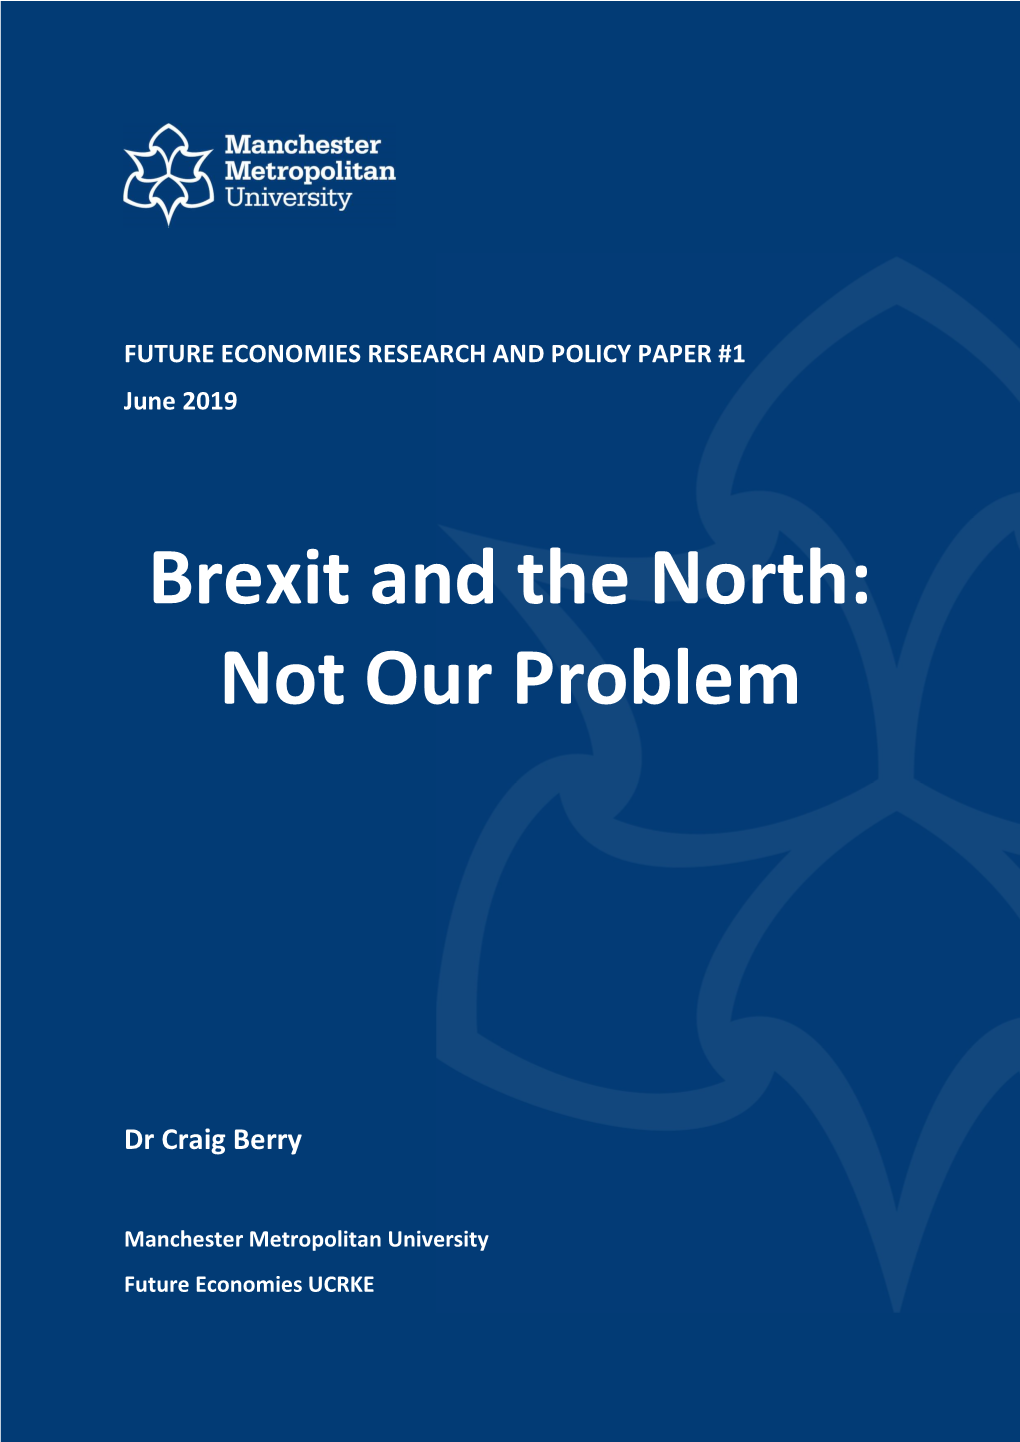 Brexit and the North: Not Our Problem